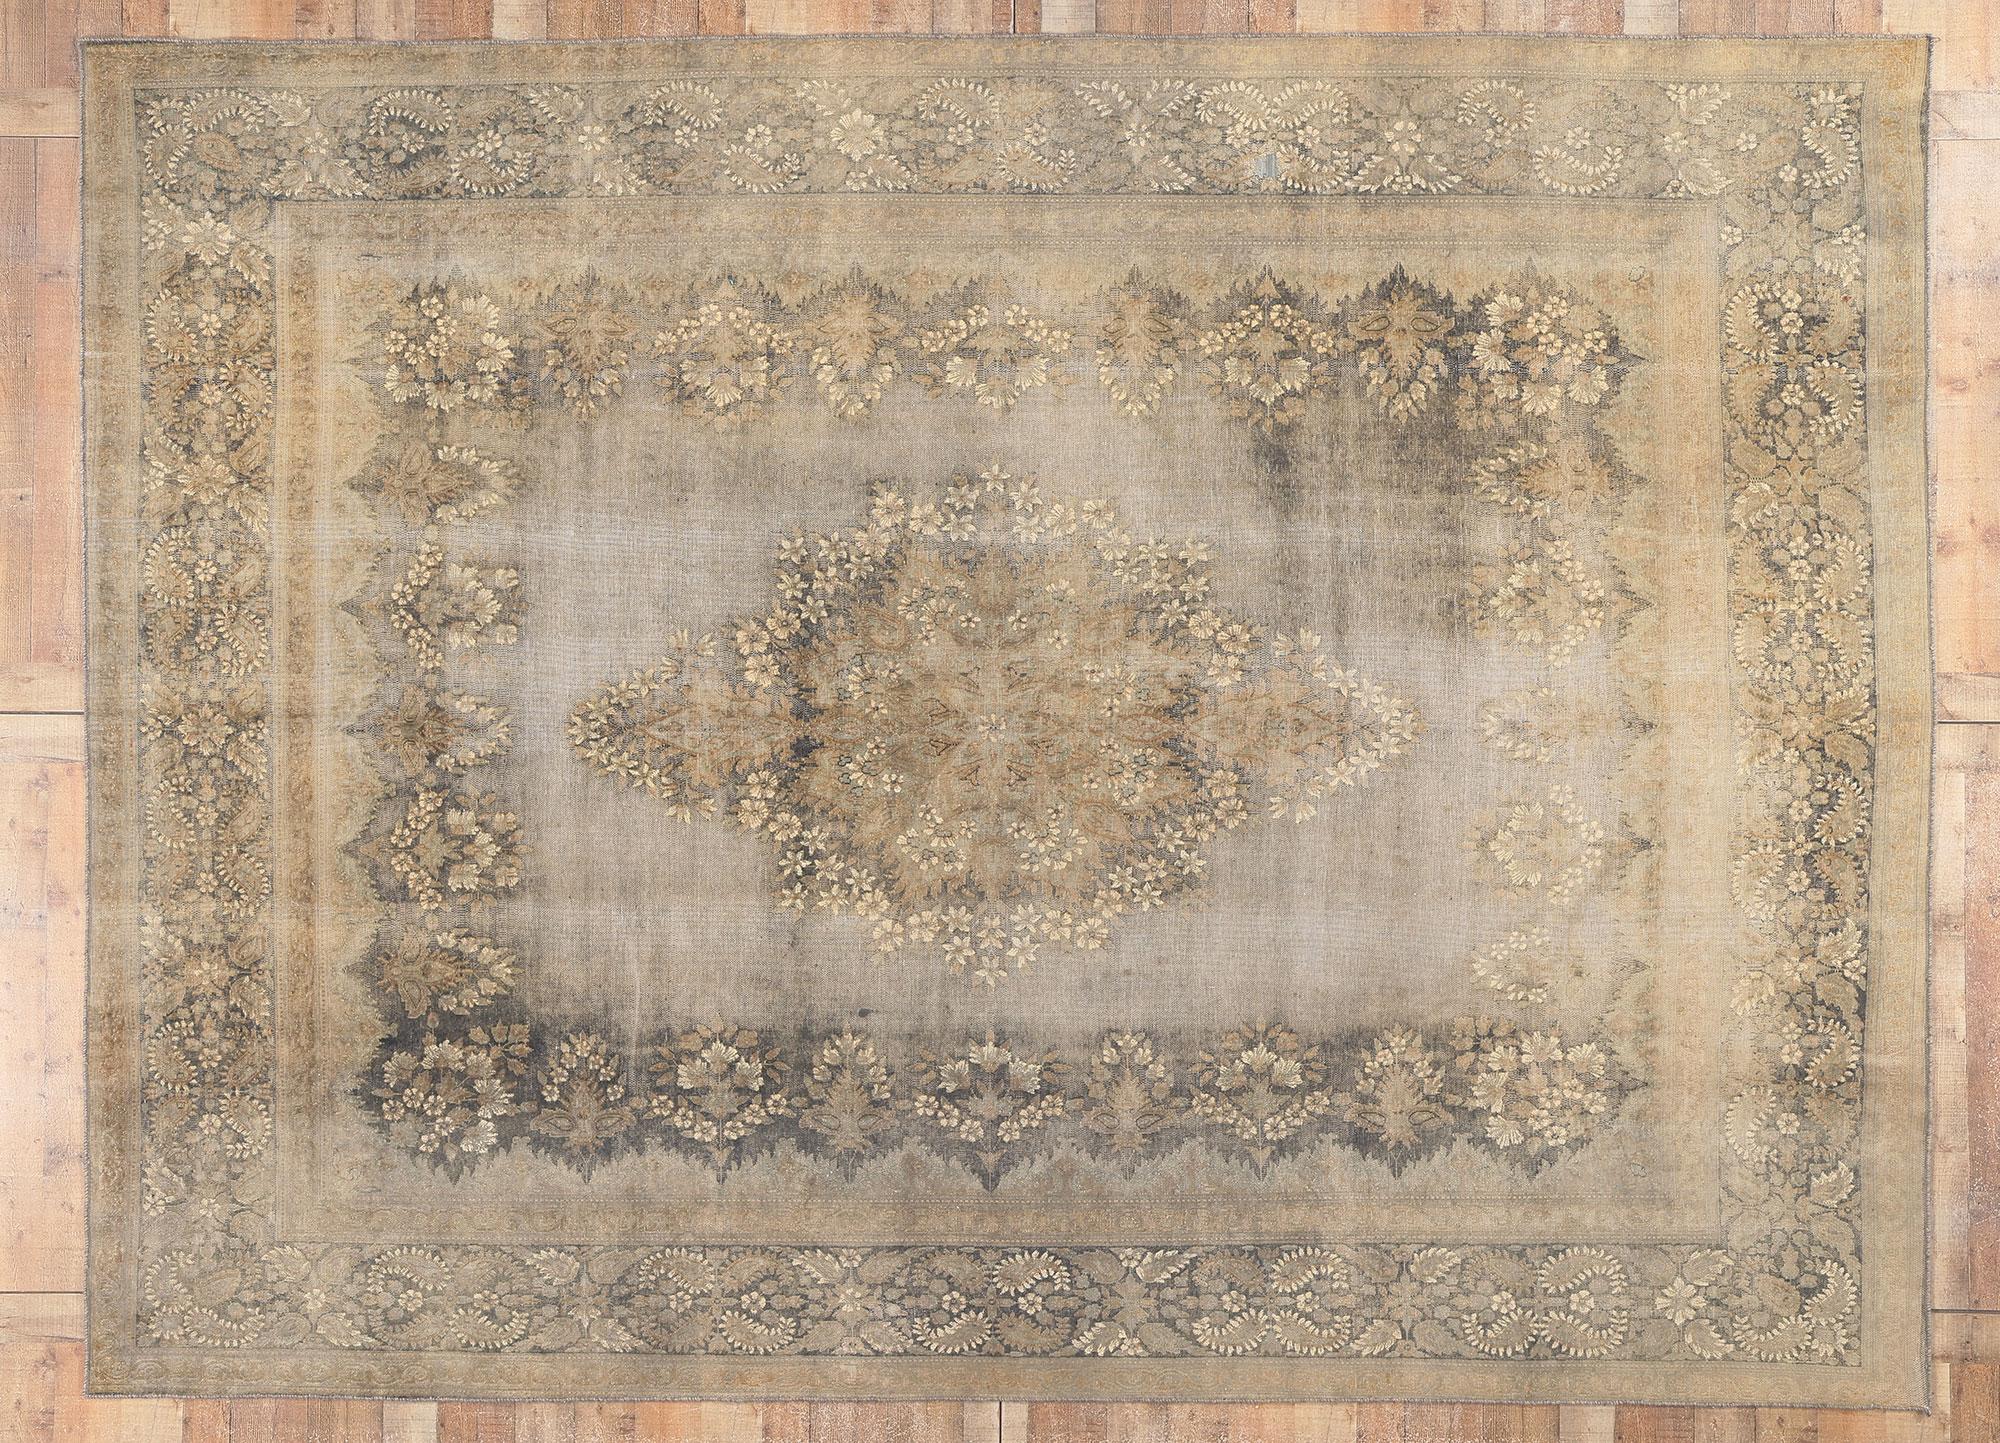 Wool Vintage Turkish Overdyed Rug, American Colonial Revival Meets Modern Industrial For Sale